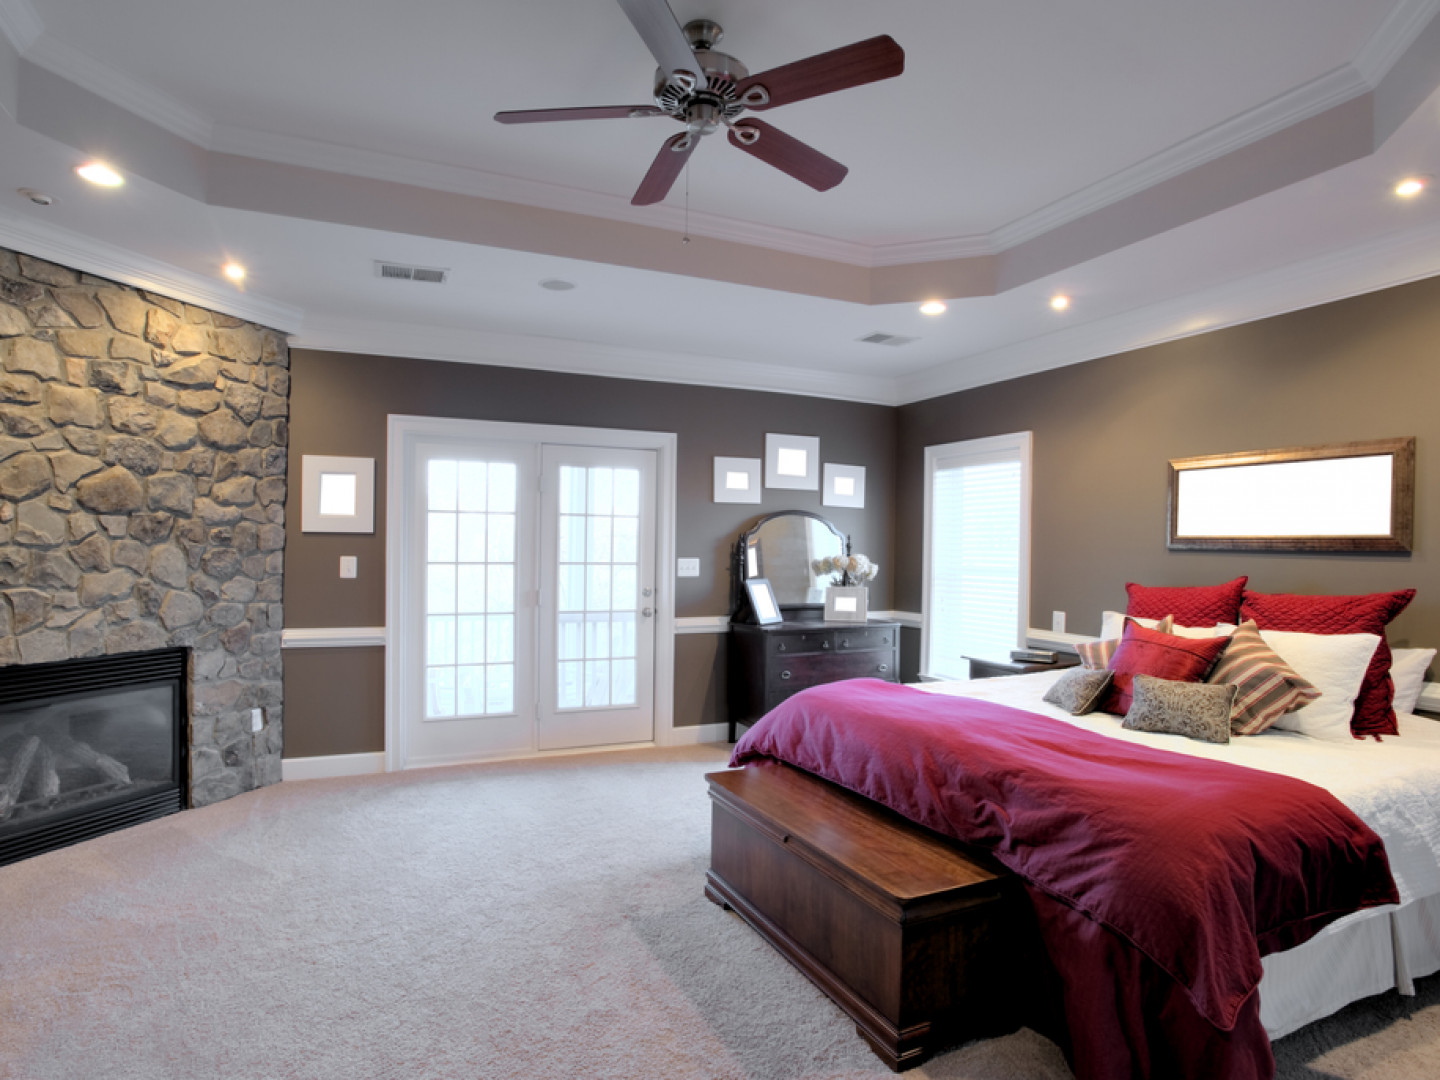 Add a Ceiling Fan to Any Room